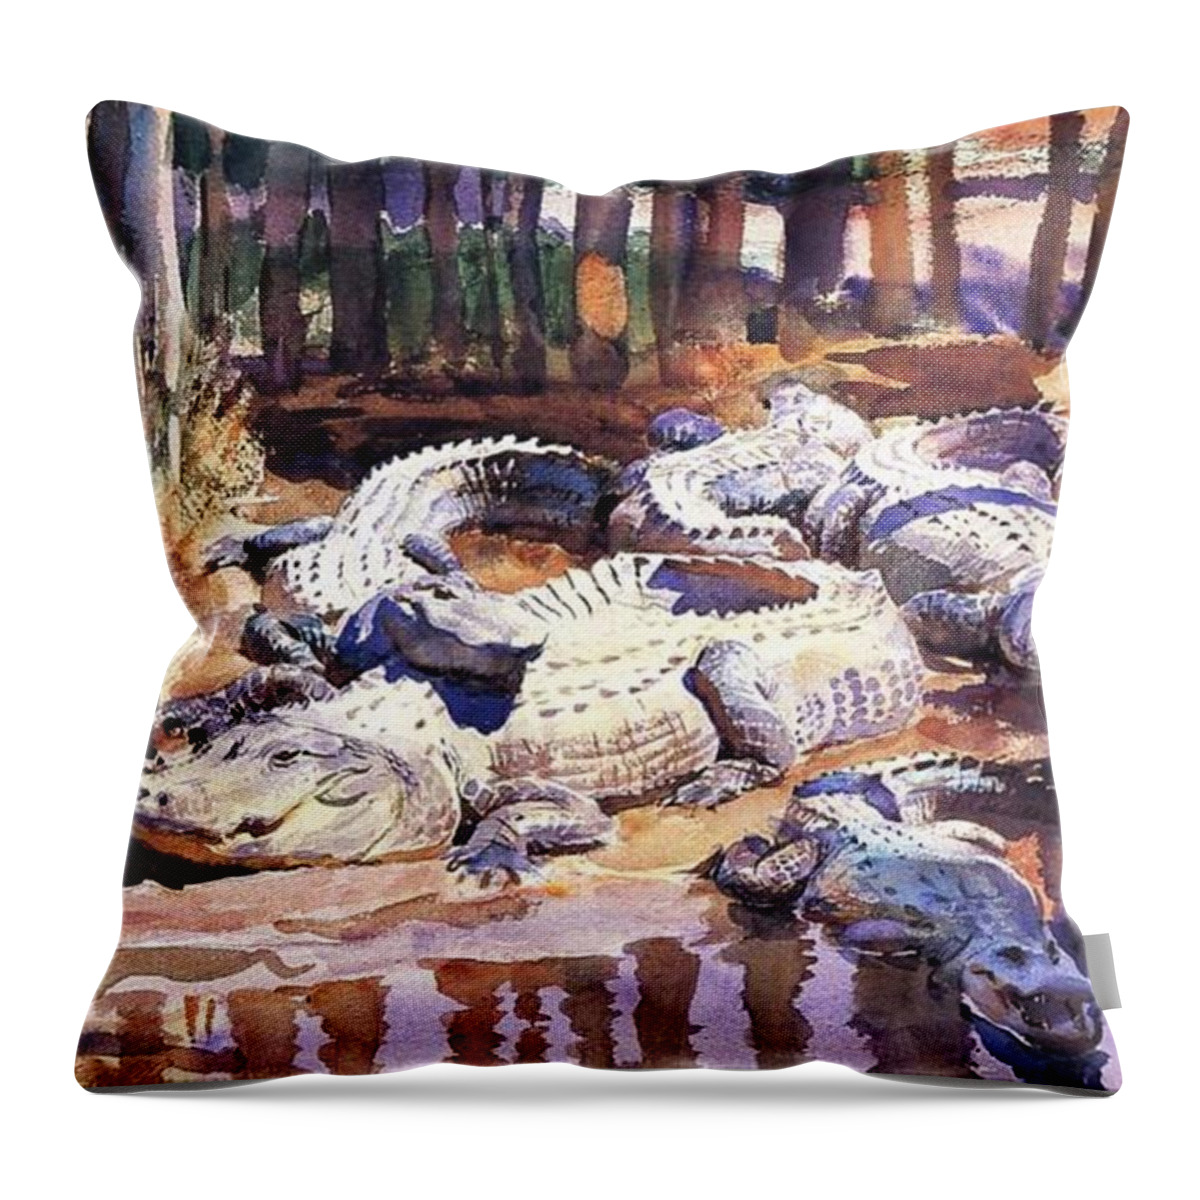 Alligator Throw Pillow featuring the painting Muddy Alligators #2 by John Singer Sargent